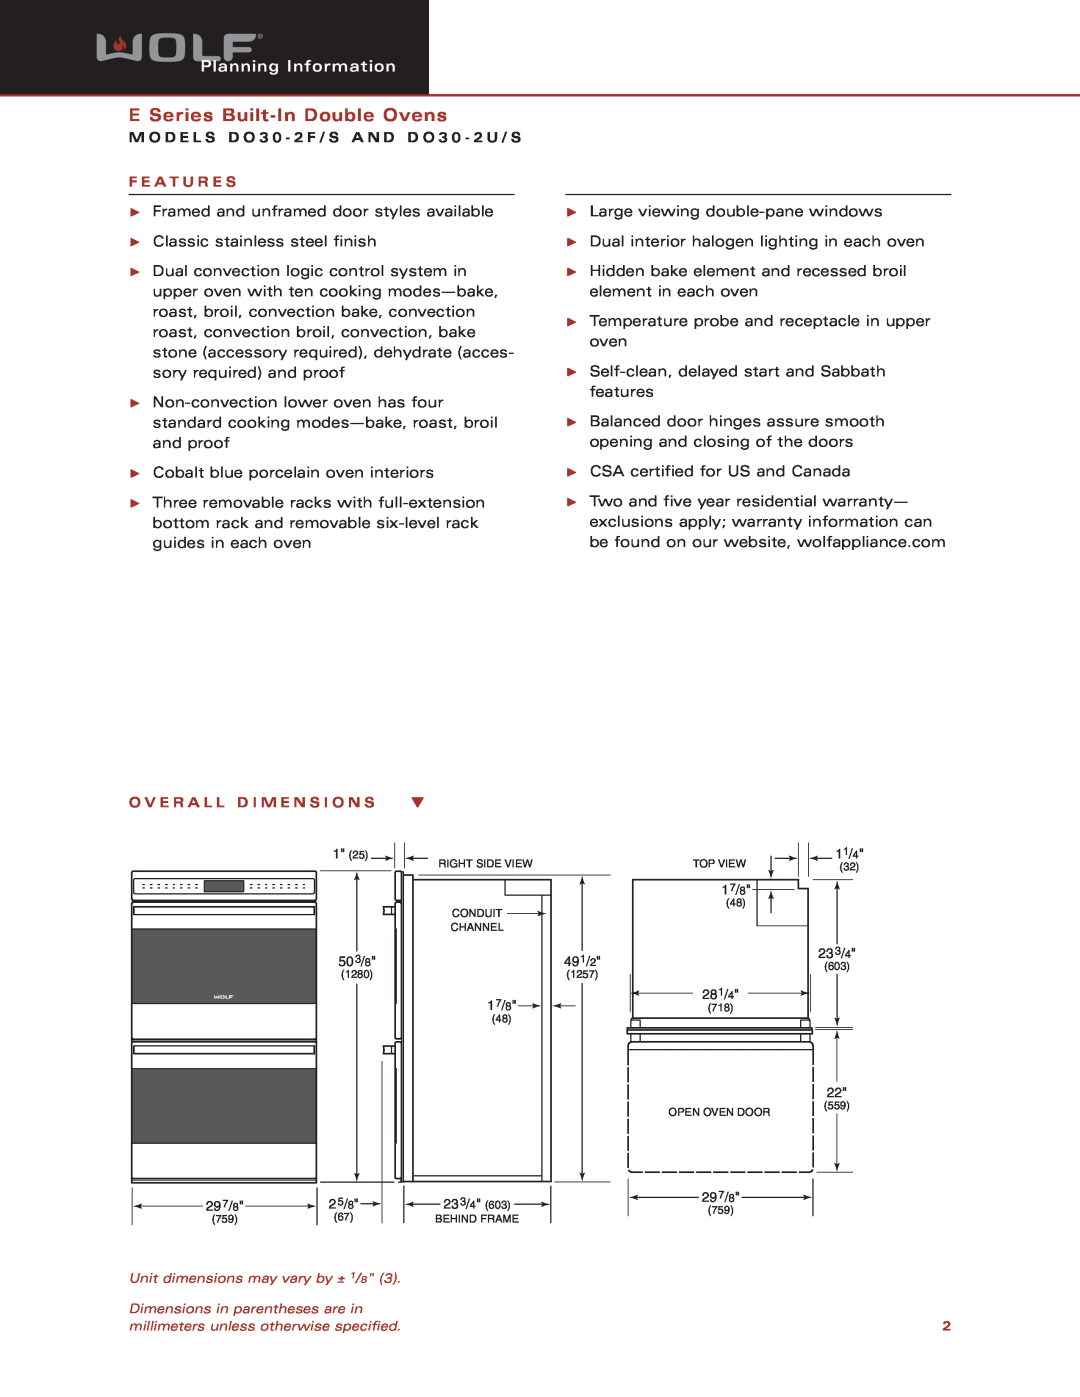 Wolf Appliance Company DO30-2U, DO30-2F, DO30-2S E Series Built-In Double Ovens, Planning Information, F E A T U R E S 